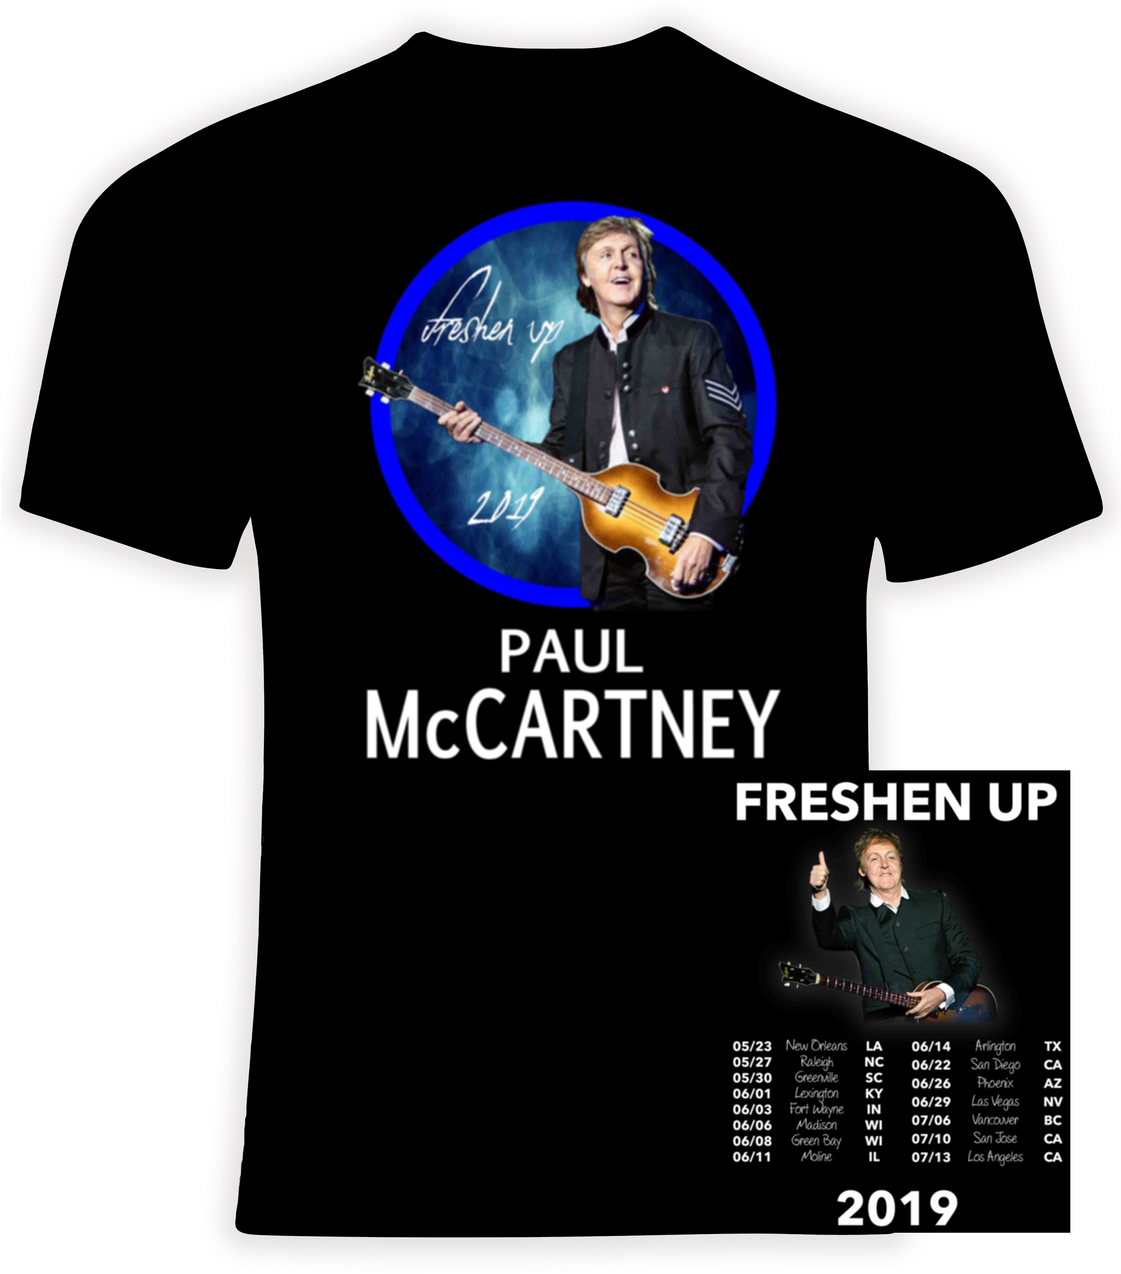 A Black Shirt With A Picture Of A Man Holding A Guitar